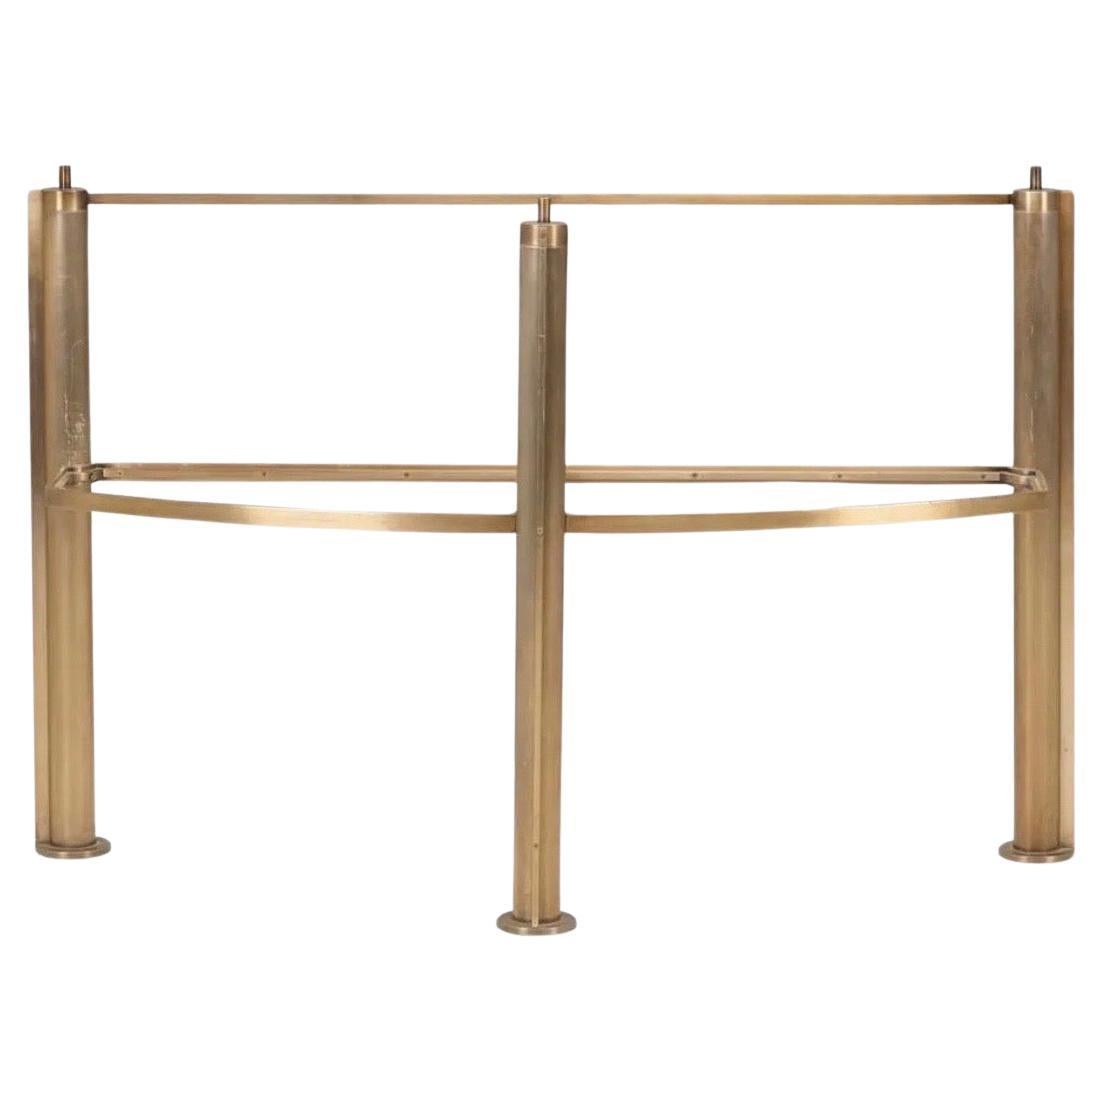 Jean-Michel Wilmotte Flag Console Postmodern Metal Table, France, 1980s.